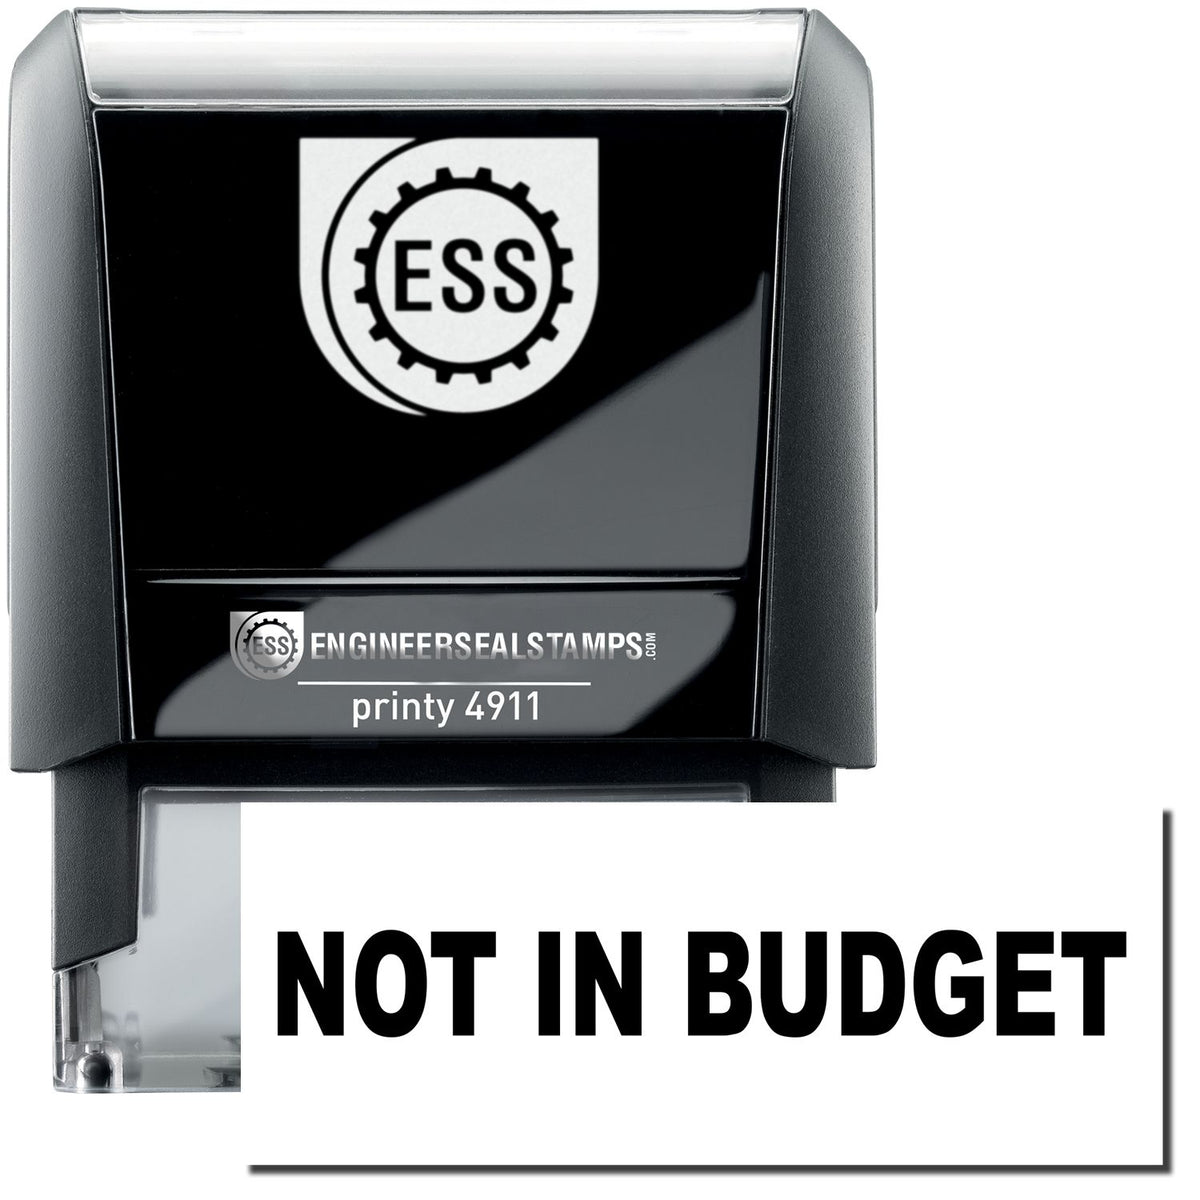 A self-inking stamp with a stamped image showing how the text &quot;NOT IN BUDGET&quot; is displayed after stamping.